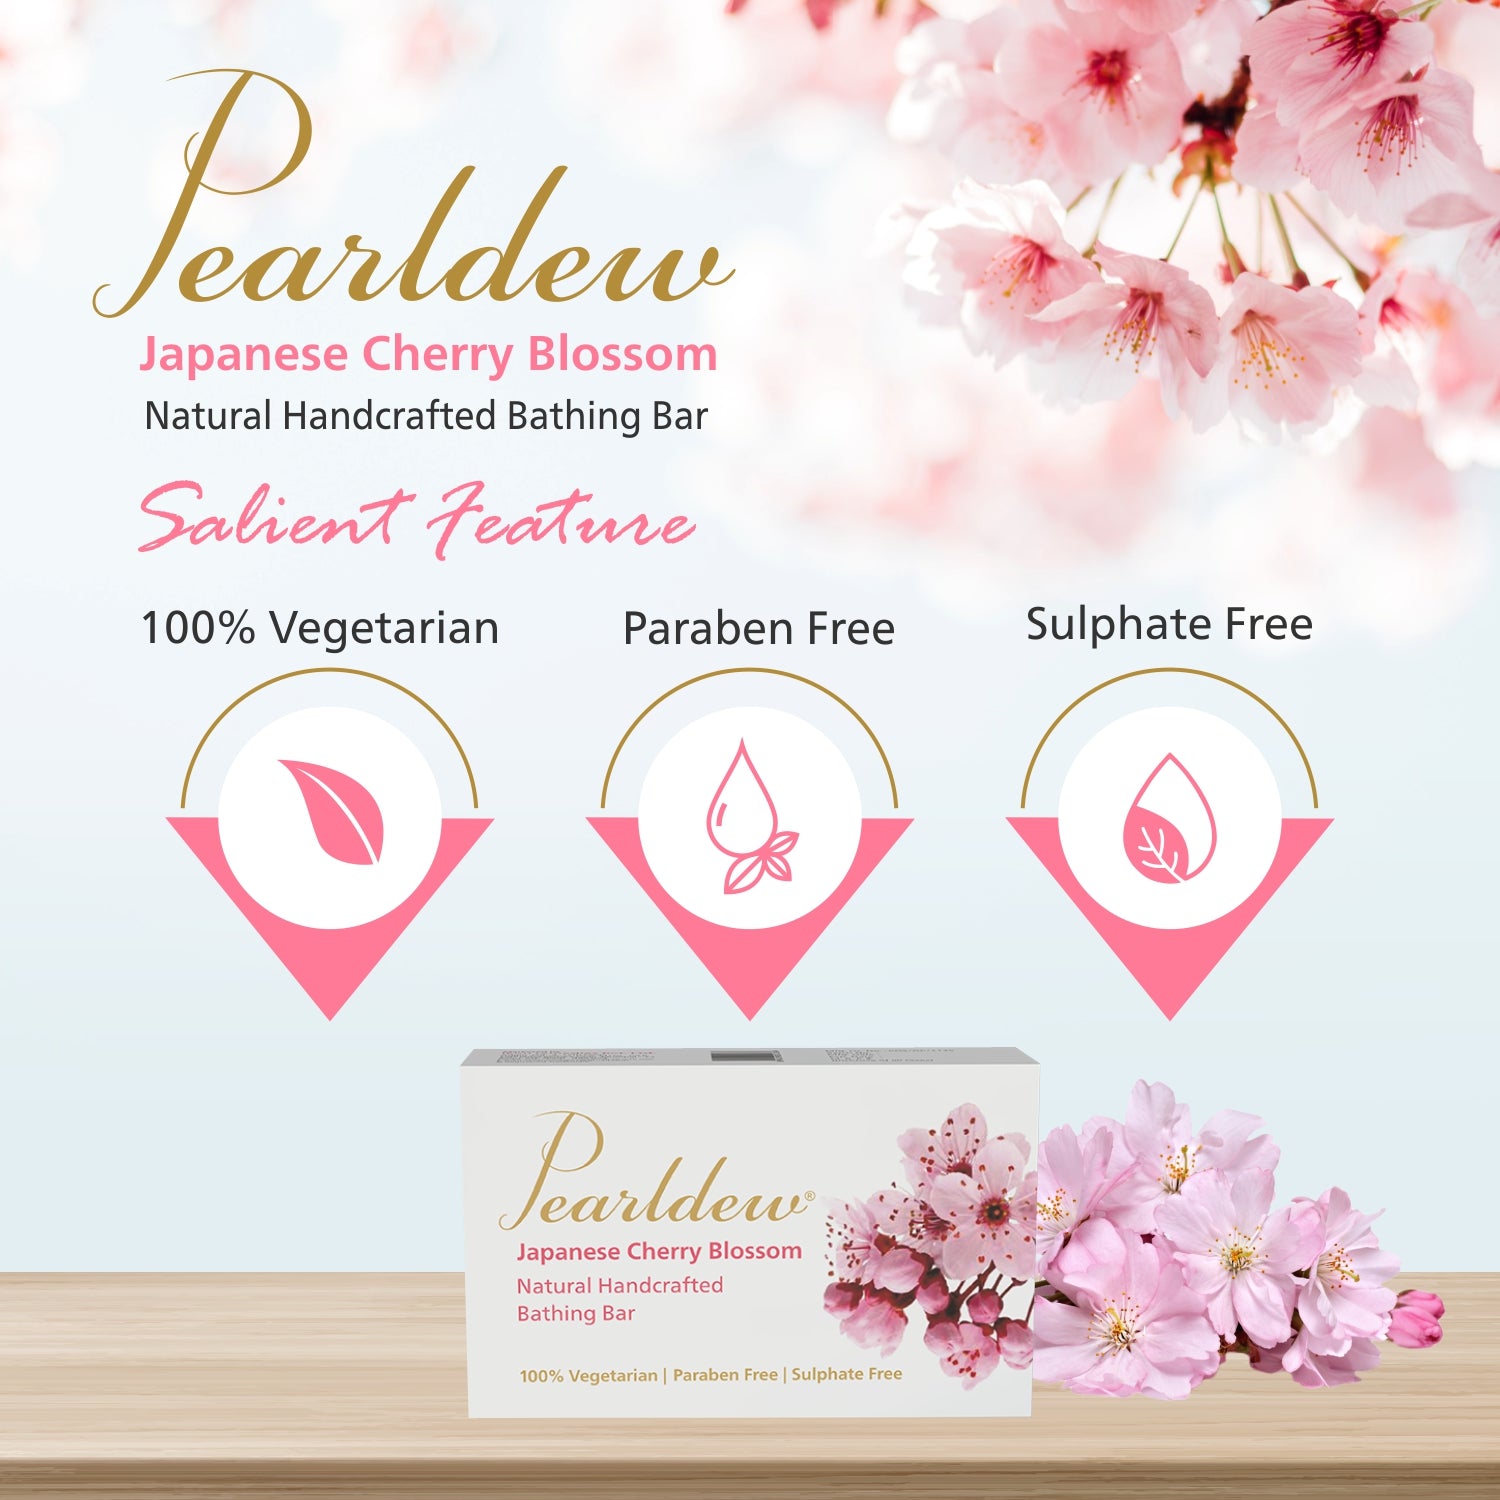 Pearldew Japanese Cherry Blossom Natural Handcrafted Bathing Bar (75 gm)